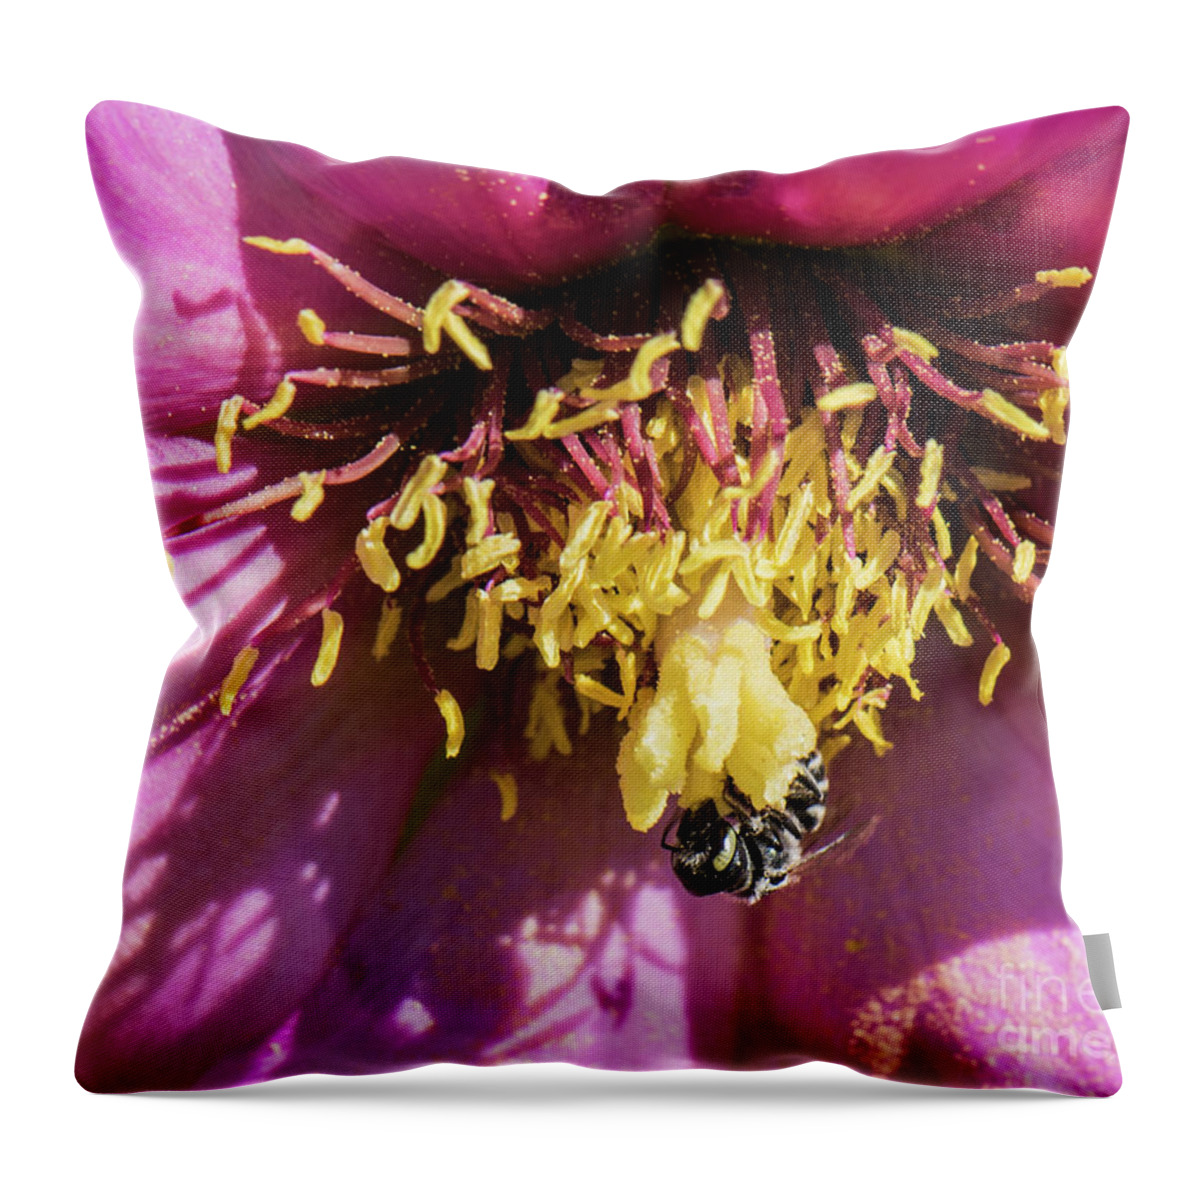 Natanson Throw Pillow featuring the photograph The Collector by Steven Natanson